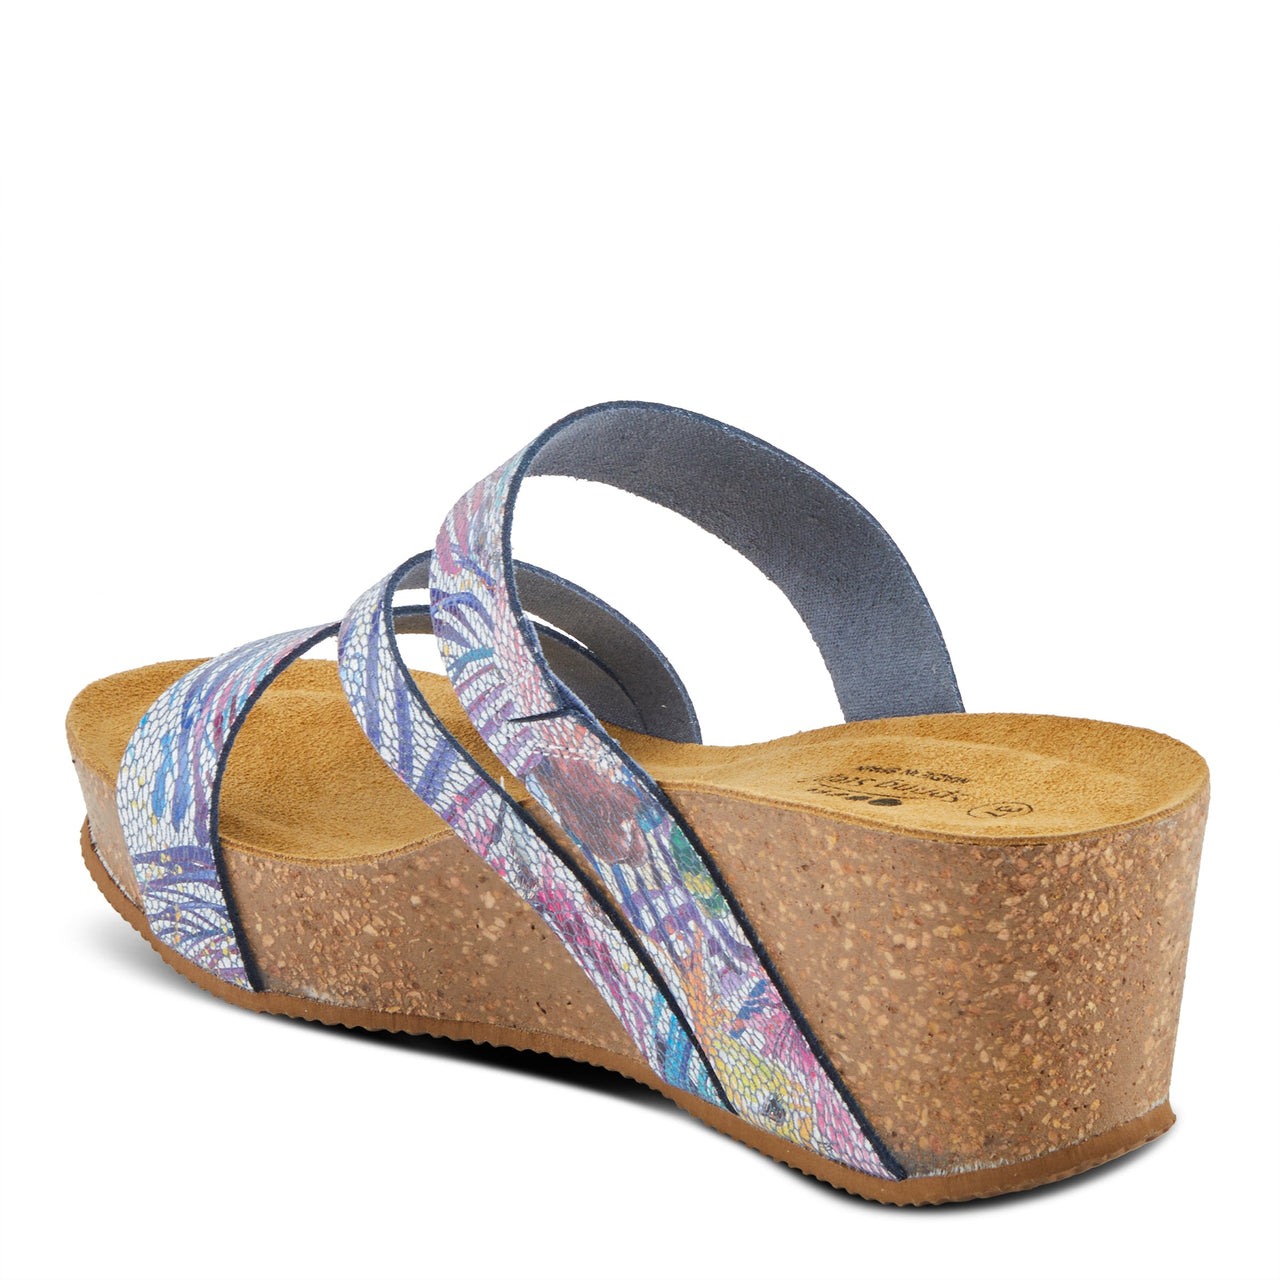  Spring Step Butterpea Sandals available in multiple attractive color options